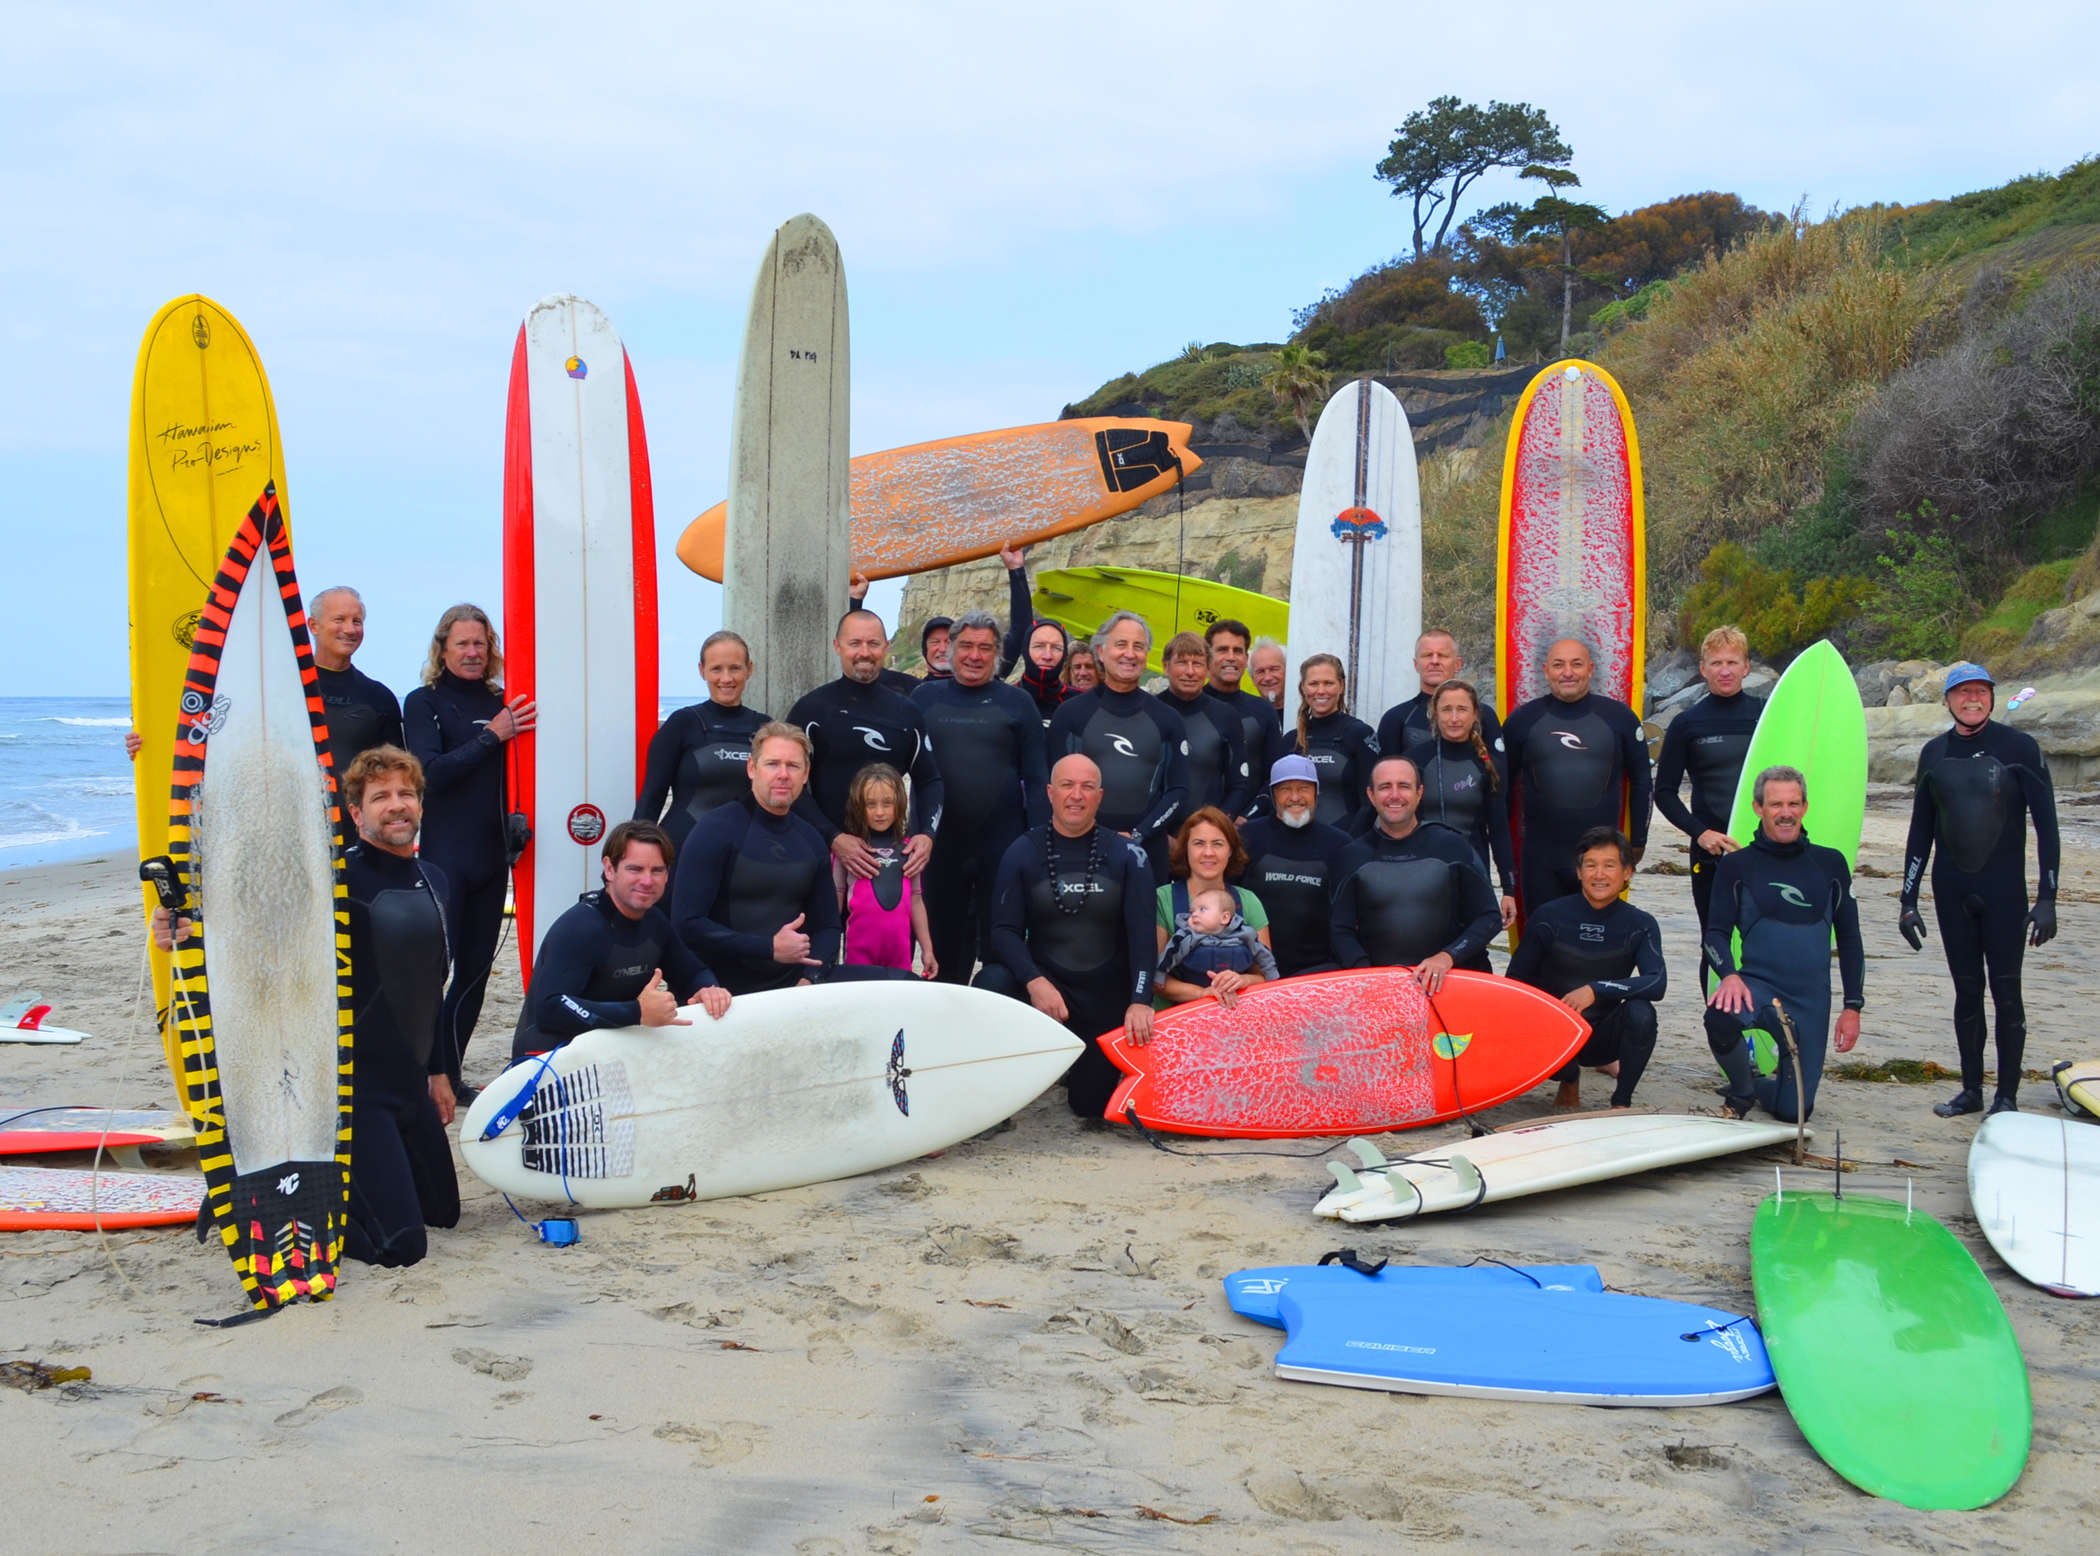 Standing fourth from right, Club President Marcelo Lobos with members of the 2013 Swami’s Surfing Association Club members. Photo by Bob Coletti